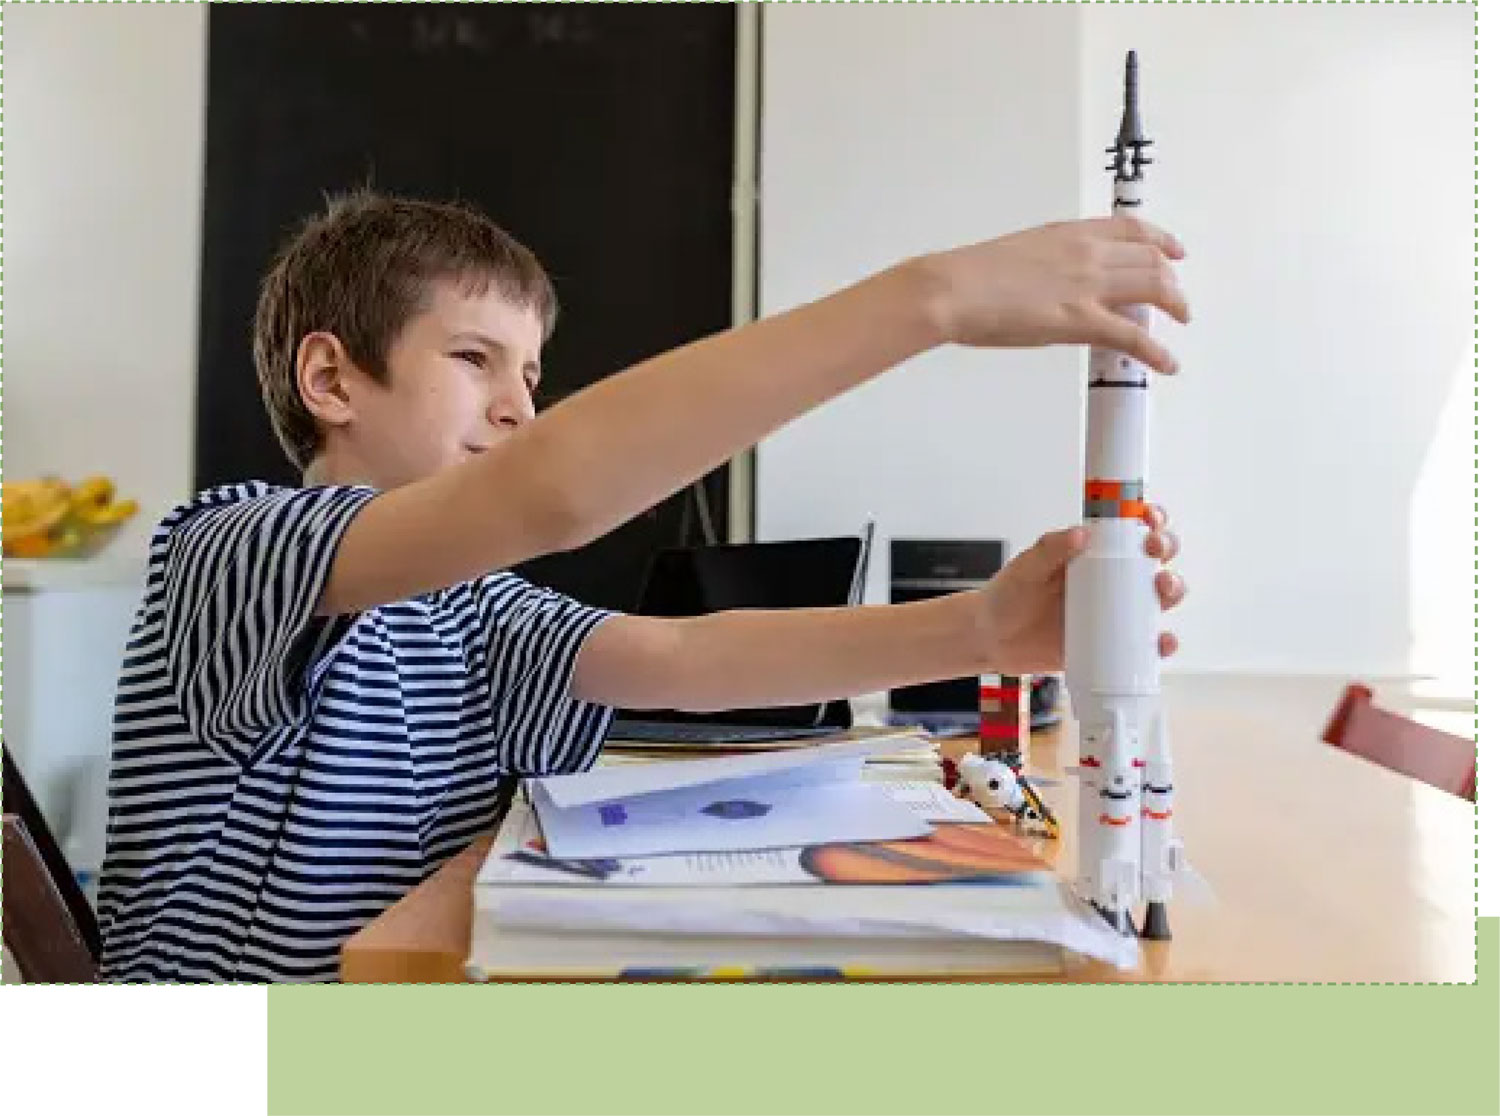 a young boy building a model rocket on a table